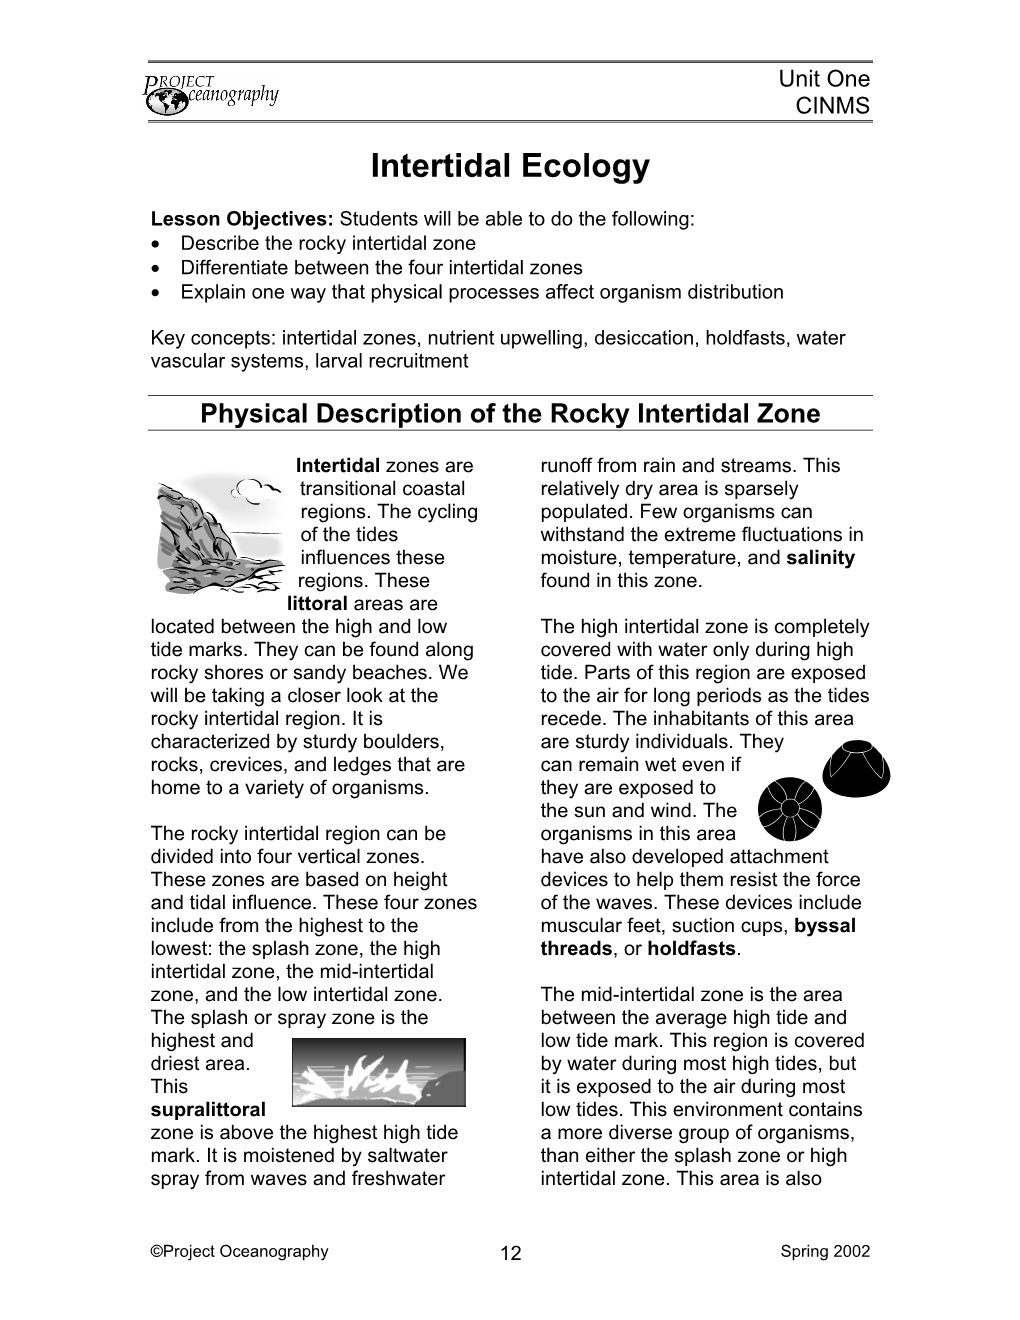 Project Oceanography: Introduction to Intertidal Ecology